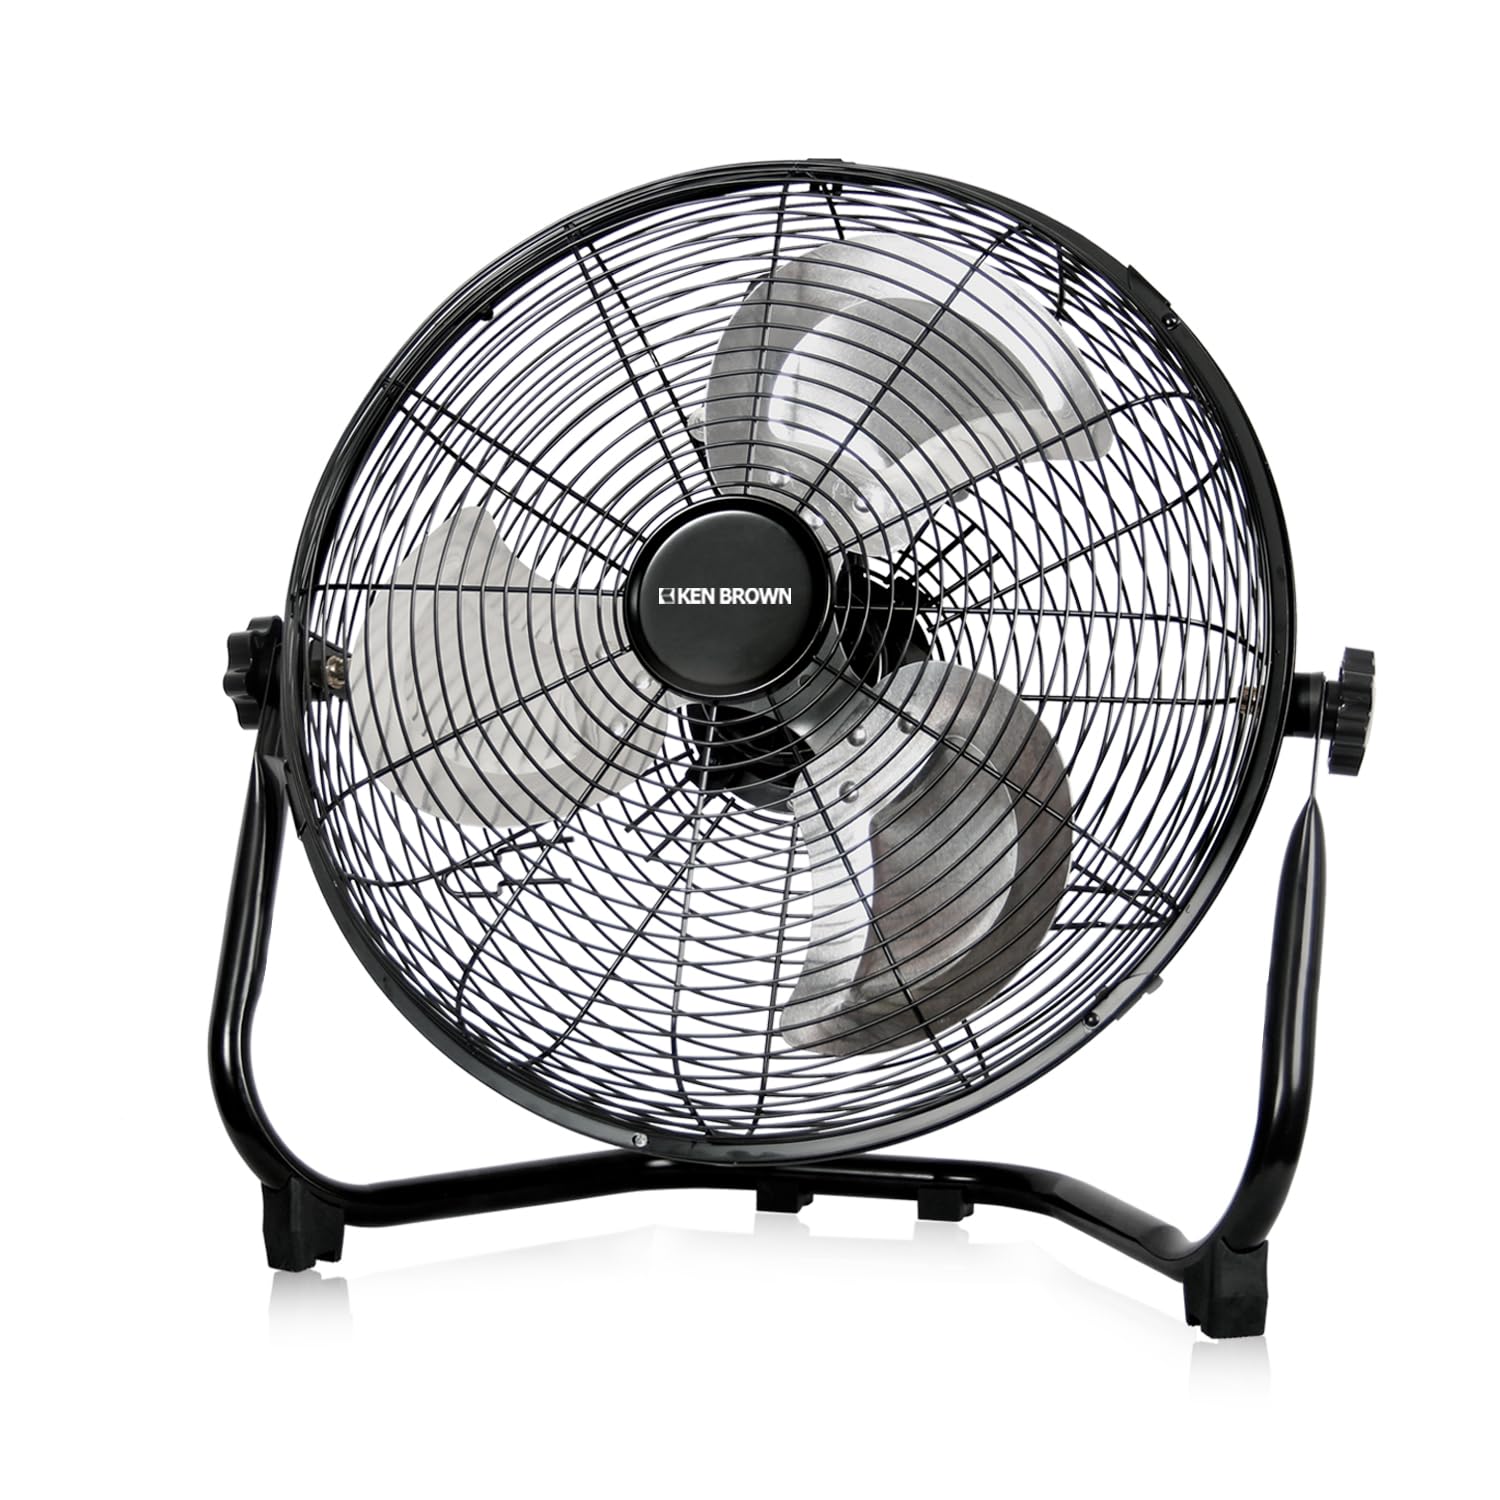 KEN BROWN 14 Inch High Velocity Floor Fan 3-Speed 360° Adjustable Tilting Powerful Airflow for Home,Residential Use, Black